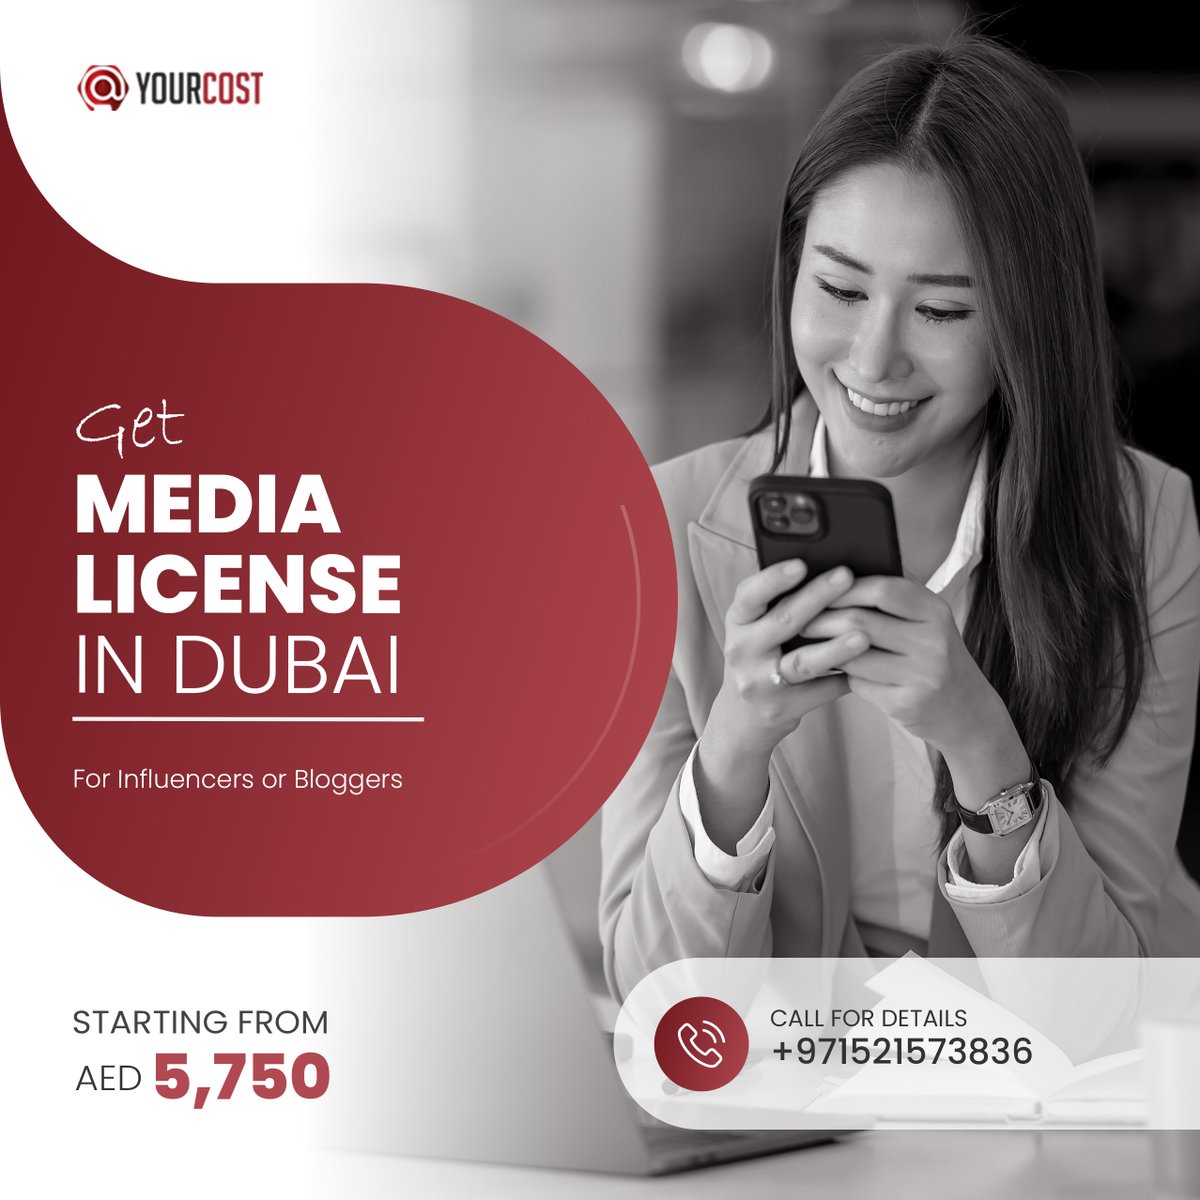 💁‍♀️Ready to start your media business in Dubai?

#medialicense #mediabusinessdubai #medialicenseuae #mediaindustry #businesssetup #businesslicense #freezonedubai #freezonebusiness #freezonelicense #businesslicense #businessowner #businessuae #business #businessideas #tradelicense